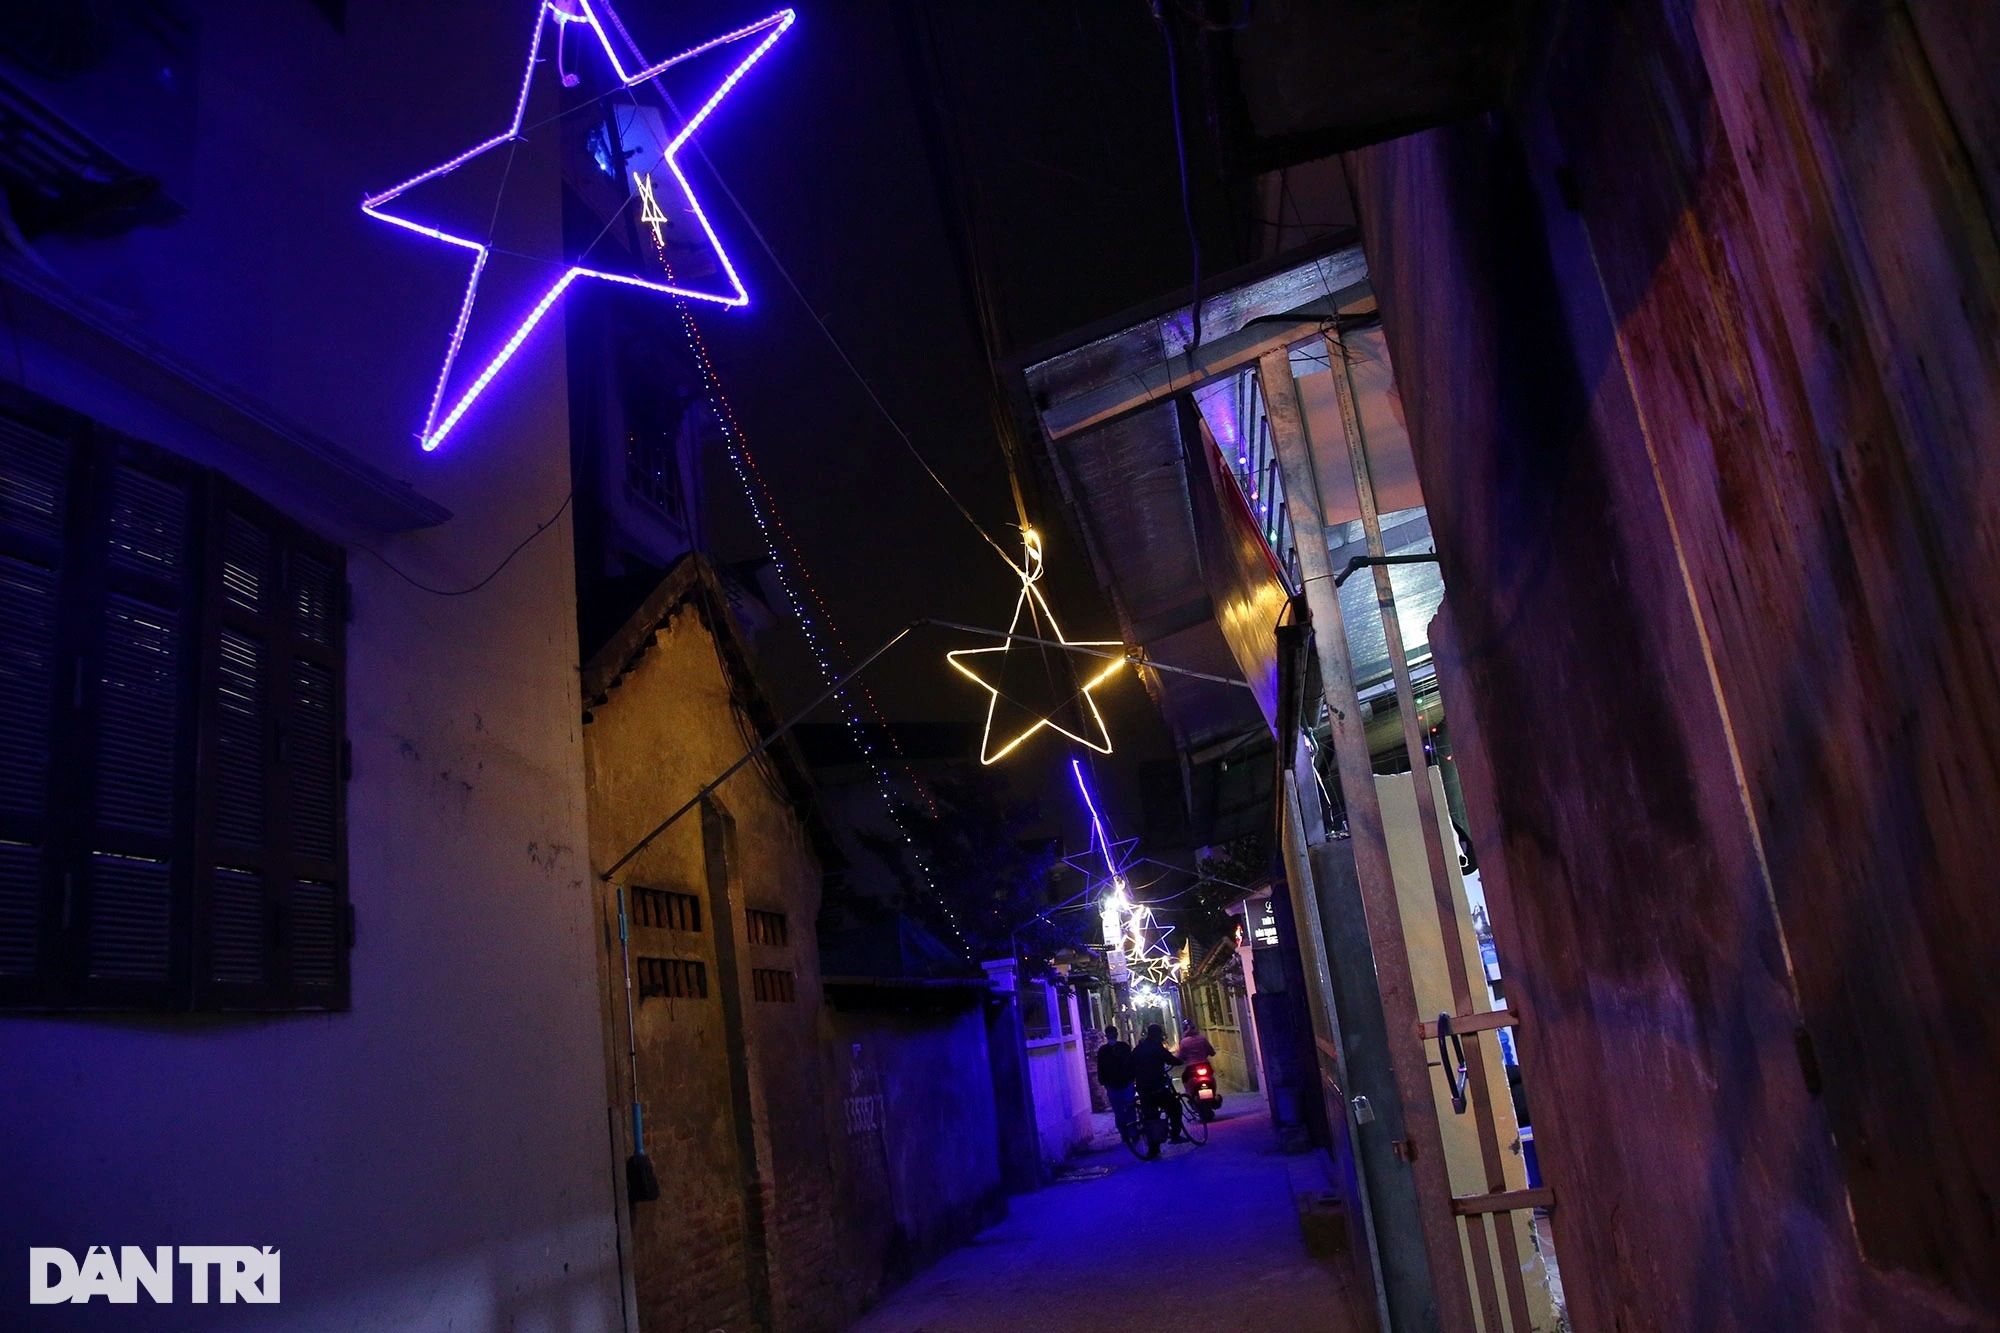 The village of more than 100 years old in Hanoi shimmers like a wonderland on Christmas - 9